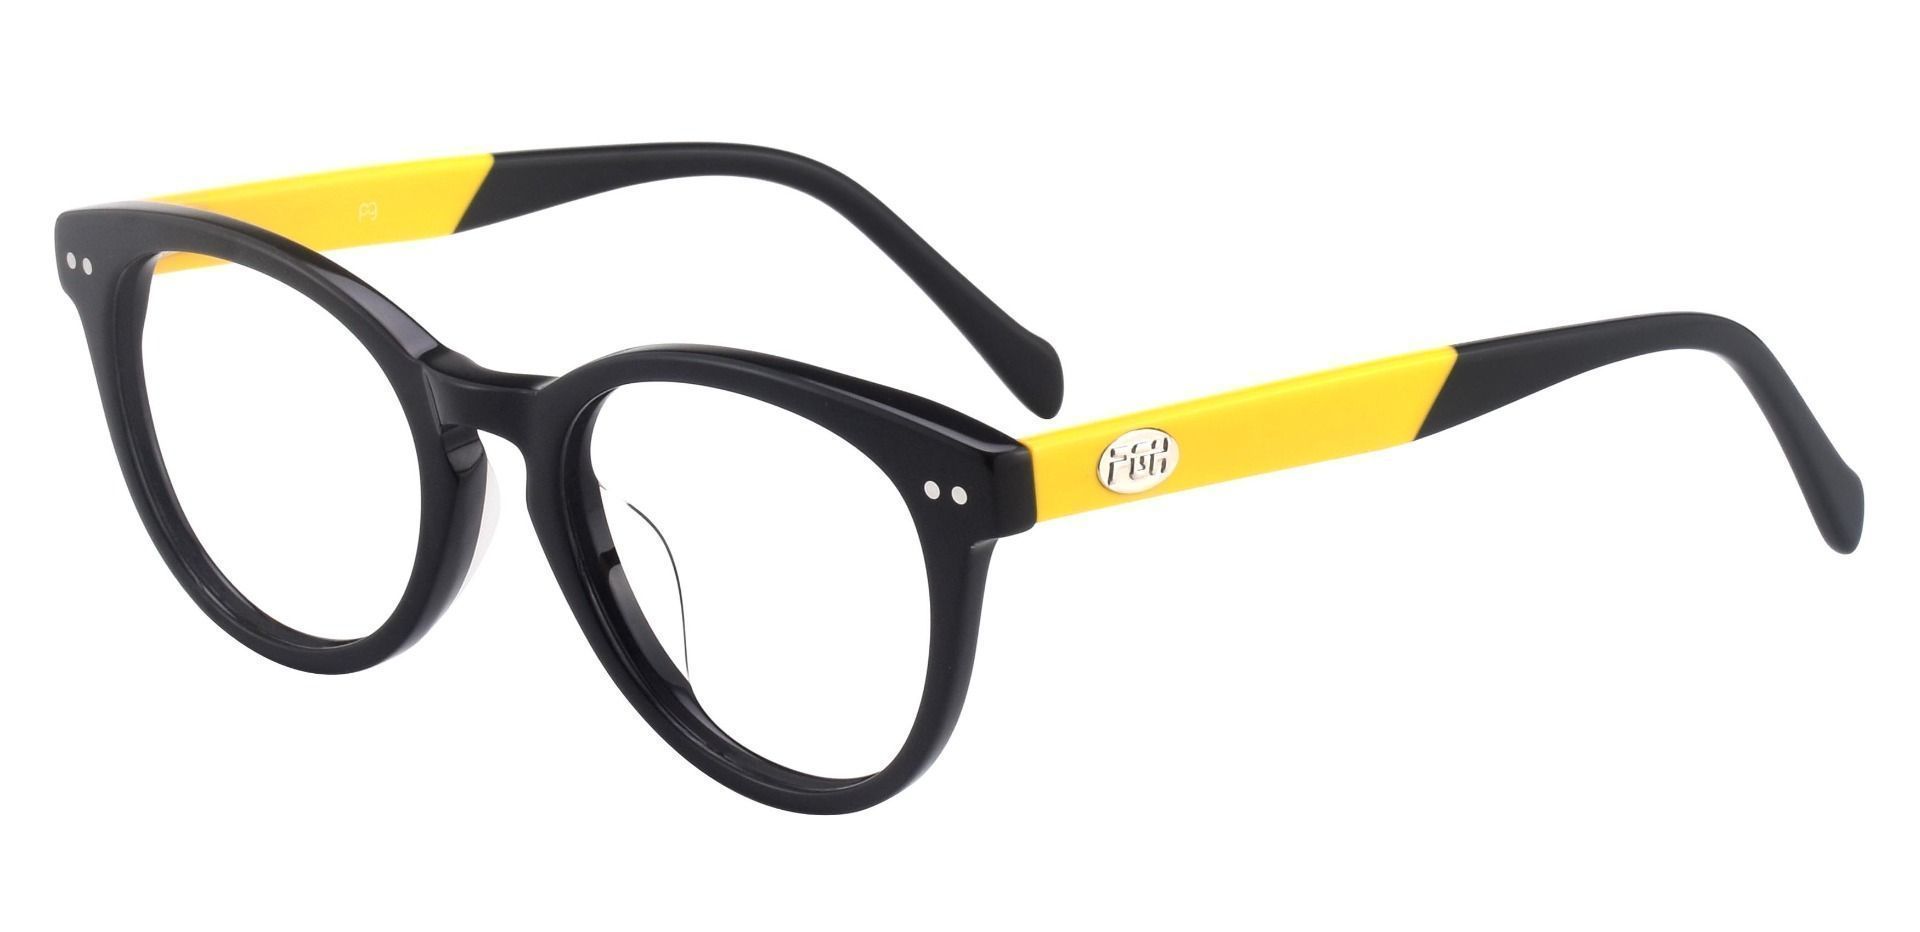 Forbes Oval Lined Bifocal Glasses - The Frame Is Black And Gold